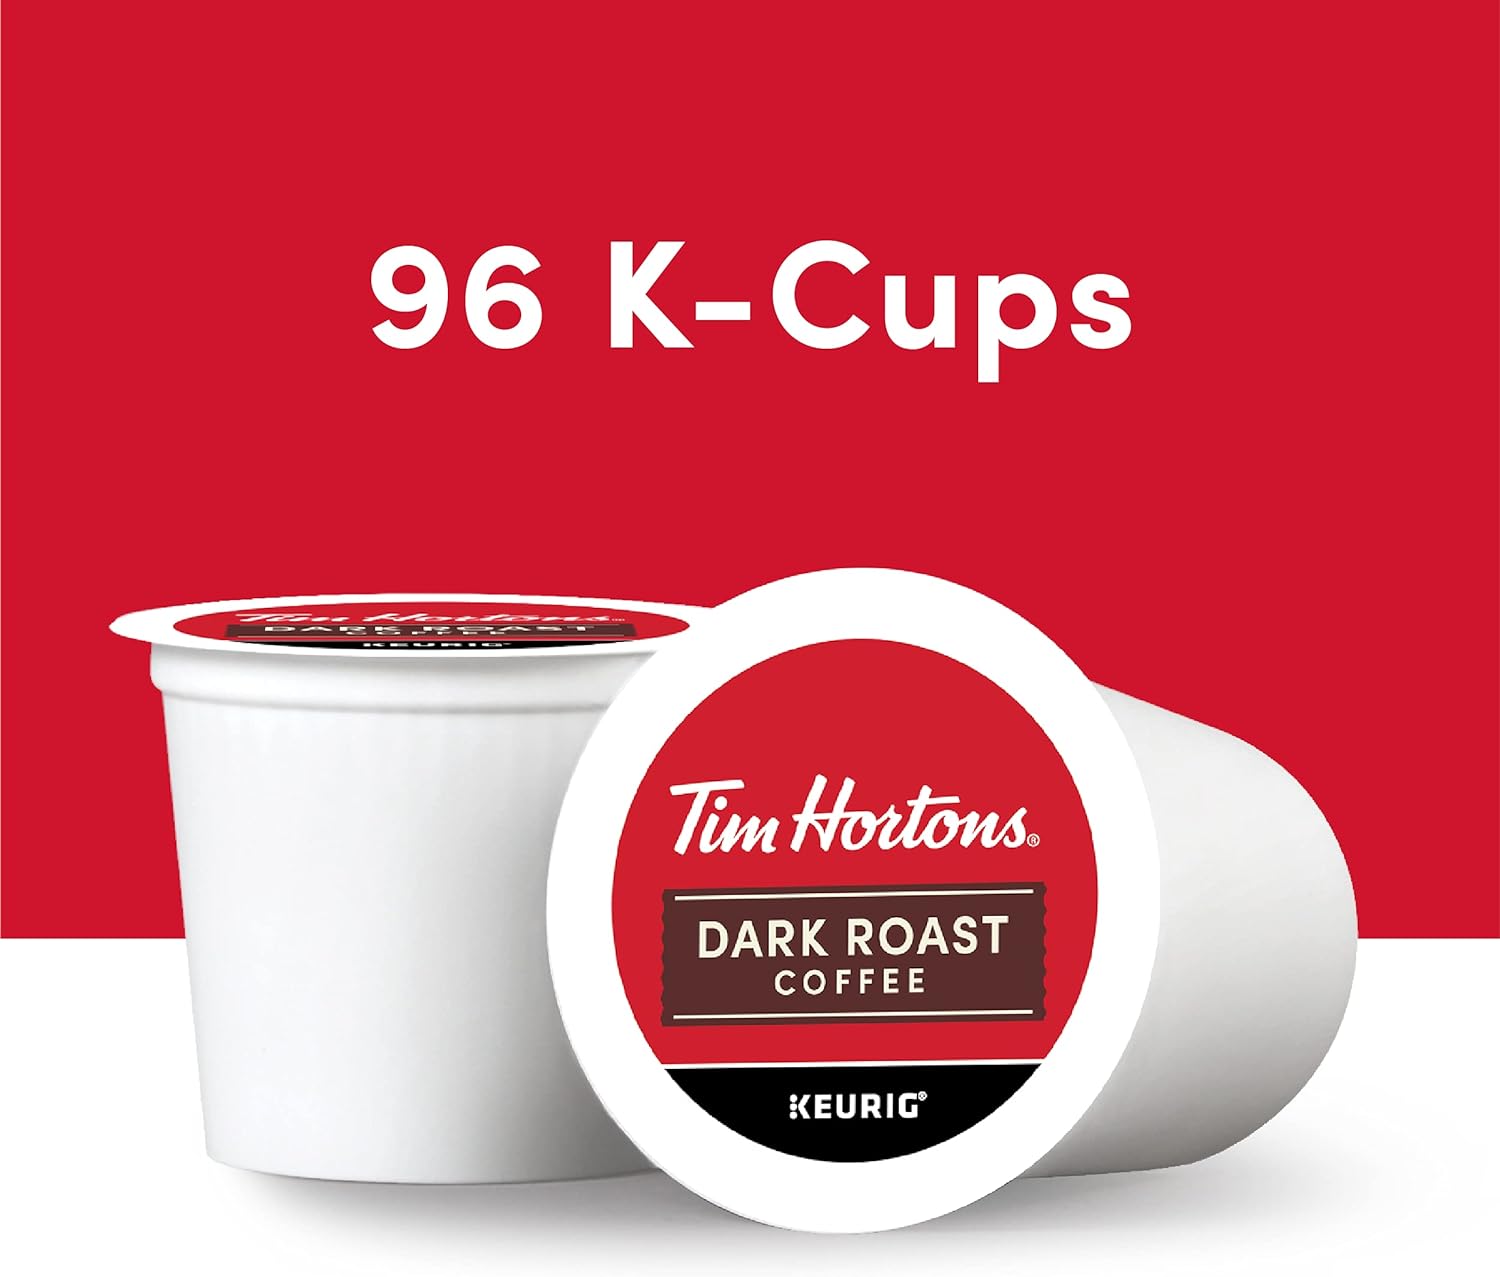 Tim Hortons Dark Roast Coffee, Single-Serve K-Cup Pods Compatible with Keurig Brewers, 96ct K-Cups, Red -24 Count (Pack of 4)